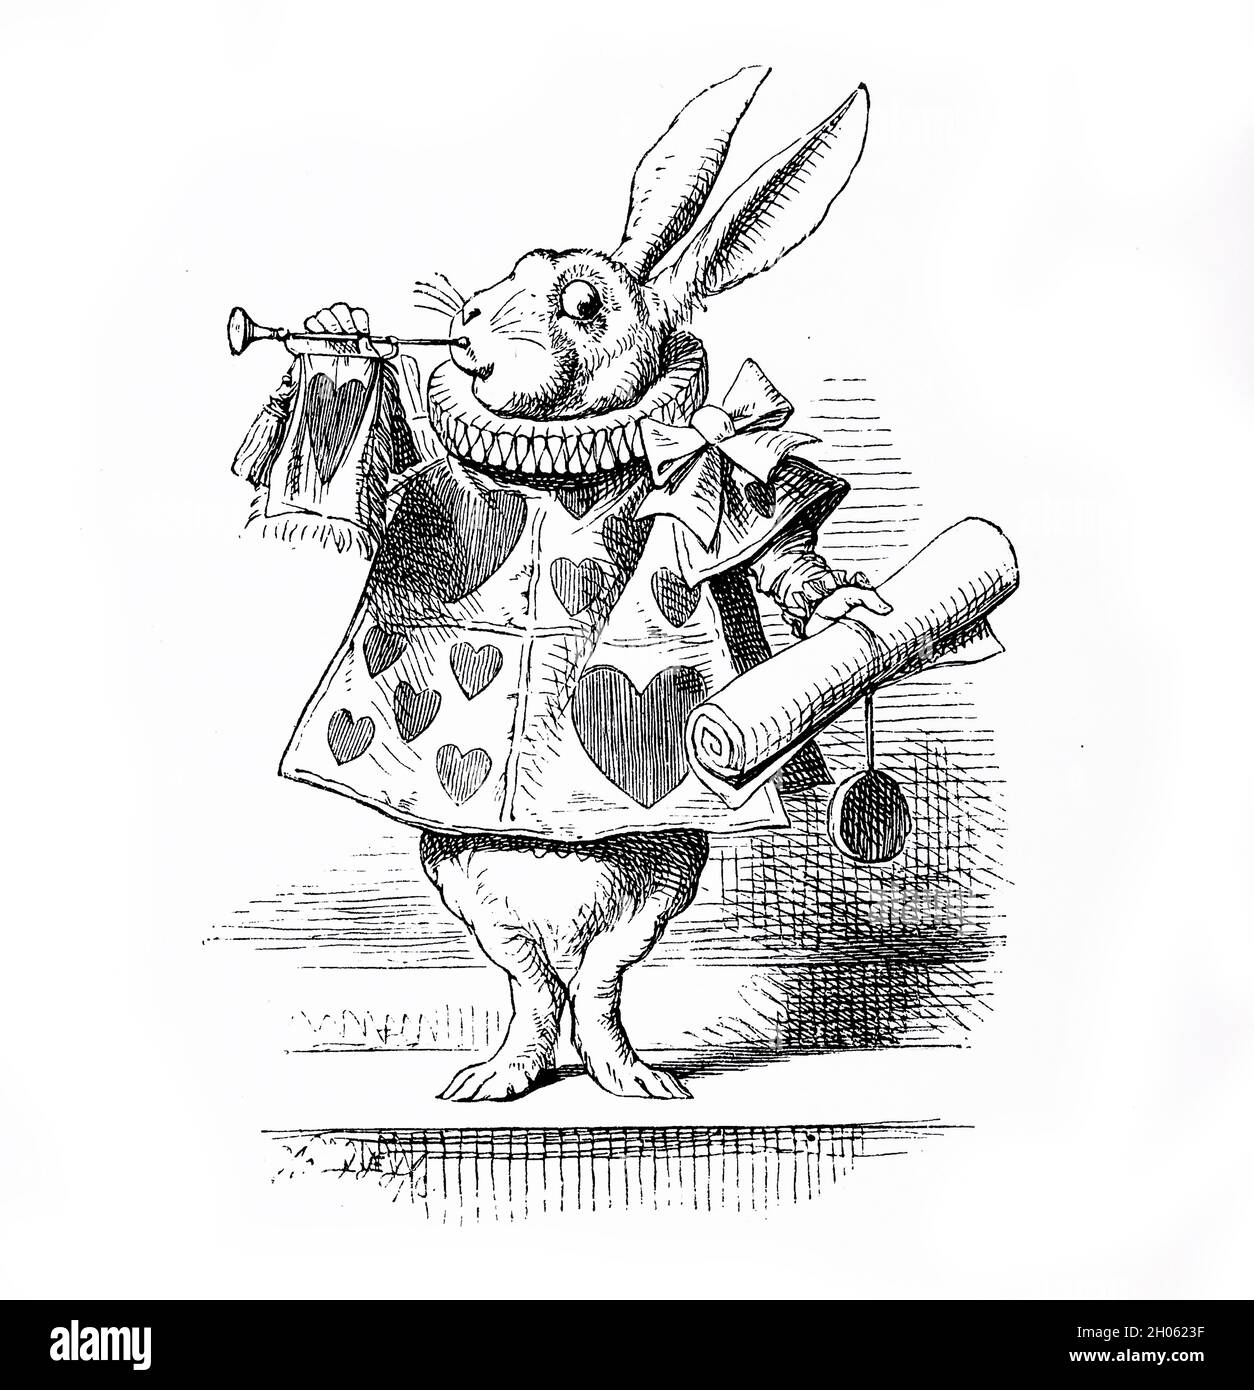 Vinatage Alice in Wonderland illustration by John Tenniel after Lewis Carols story through the looking glass Stock Photo